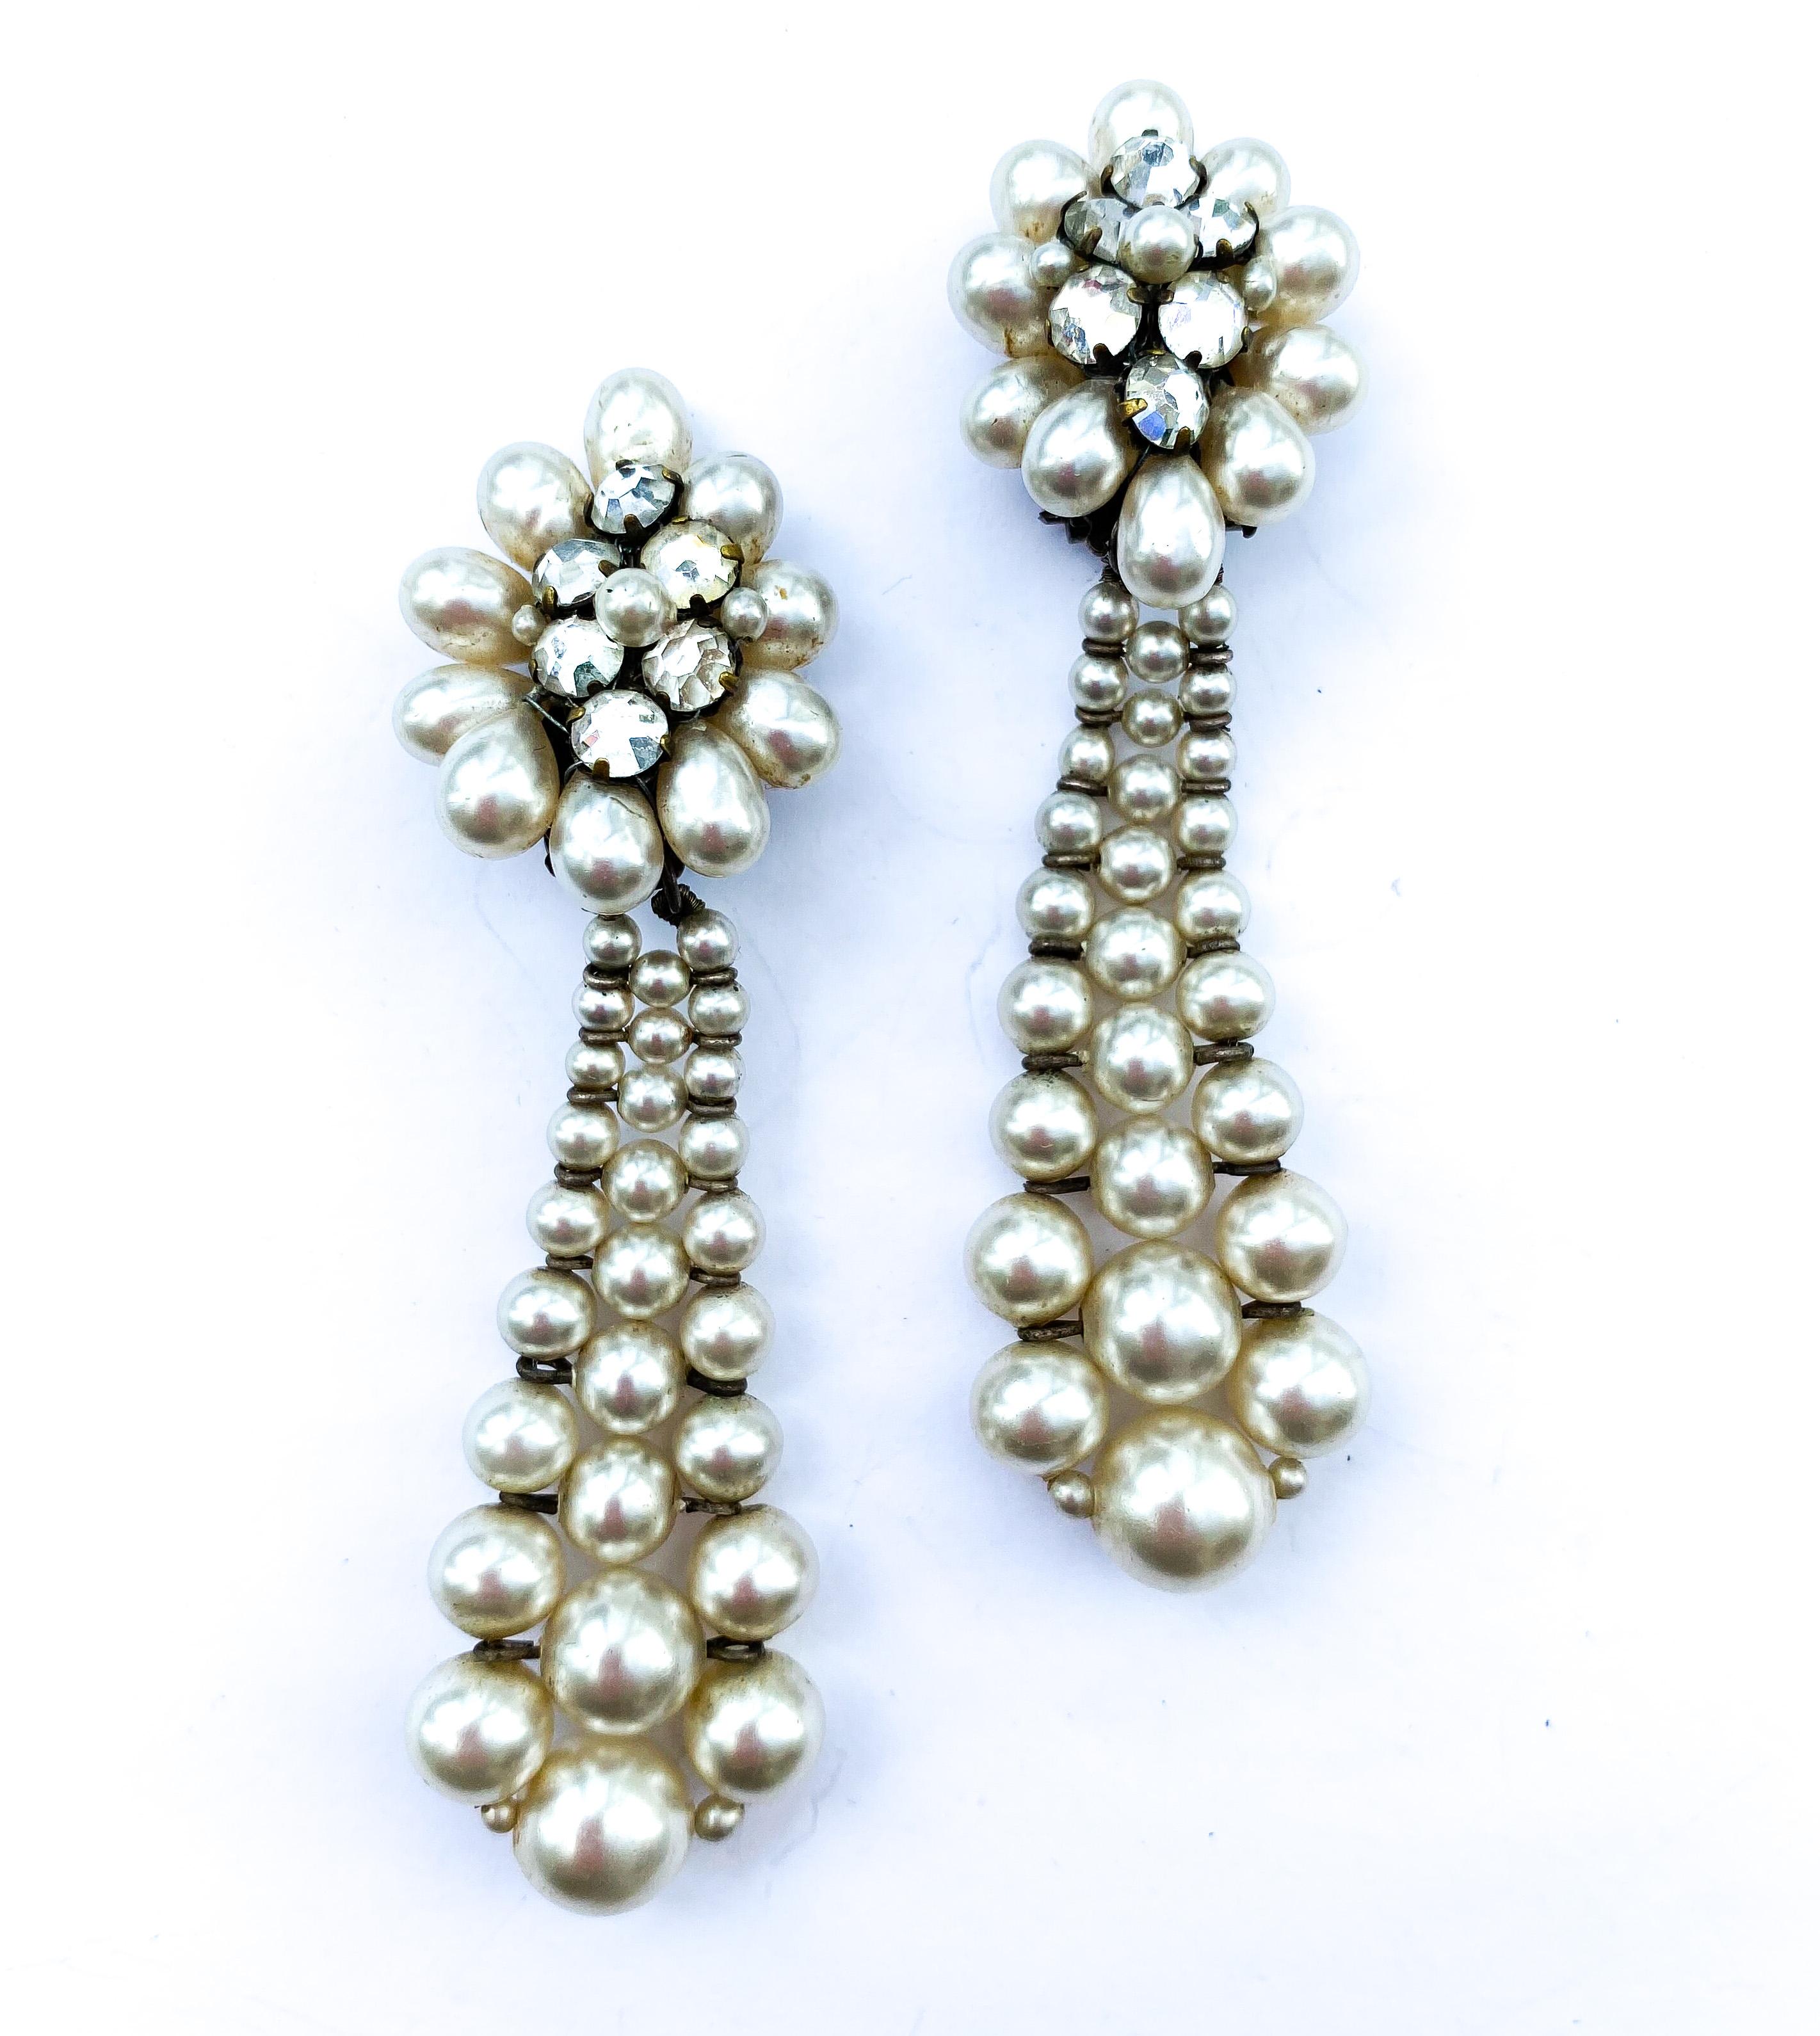 A very long and super stylish pair of faux pearl earrings by Louis Rousselet. Formed of a cluster of oblong pearls fanning out on the ear, a tapered 'knitted' or 'constructed' drop falls away from the cluster. They are set in a silvered wire, the